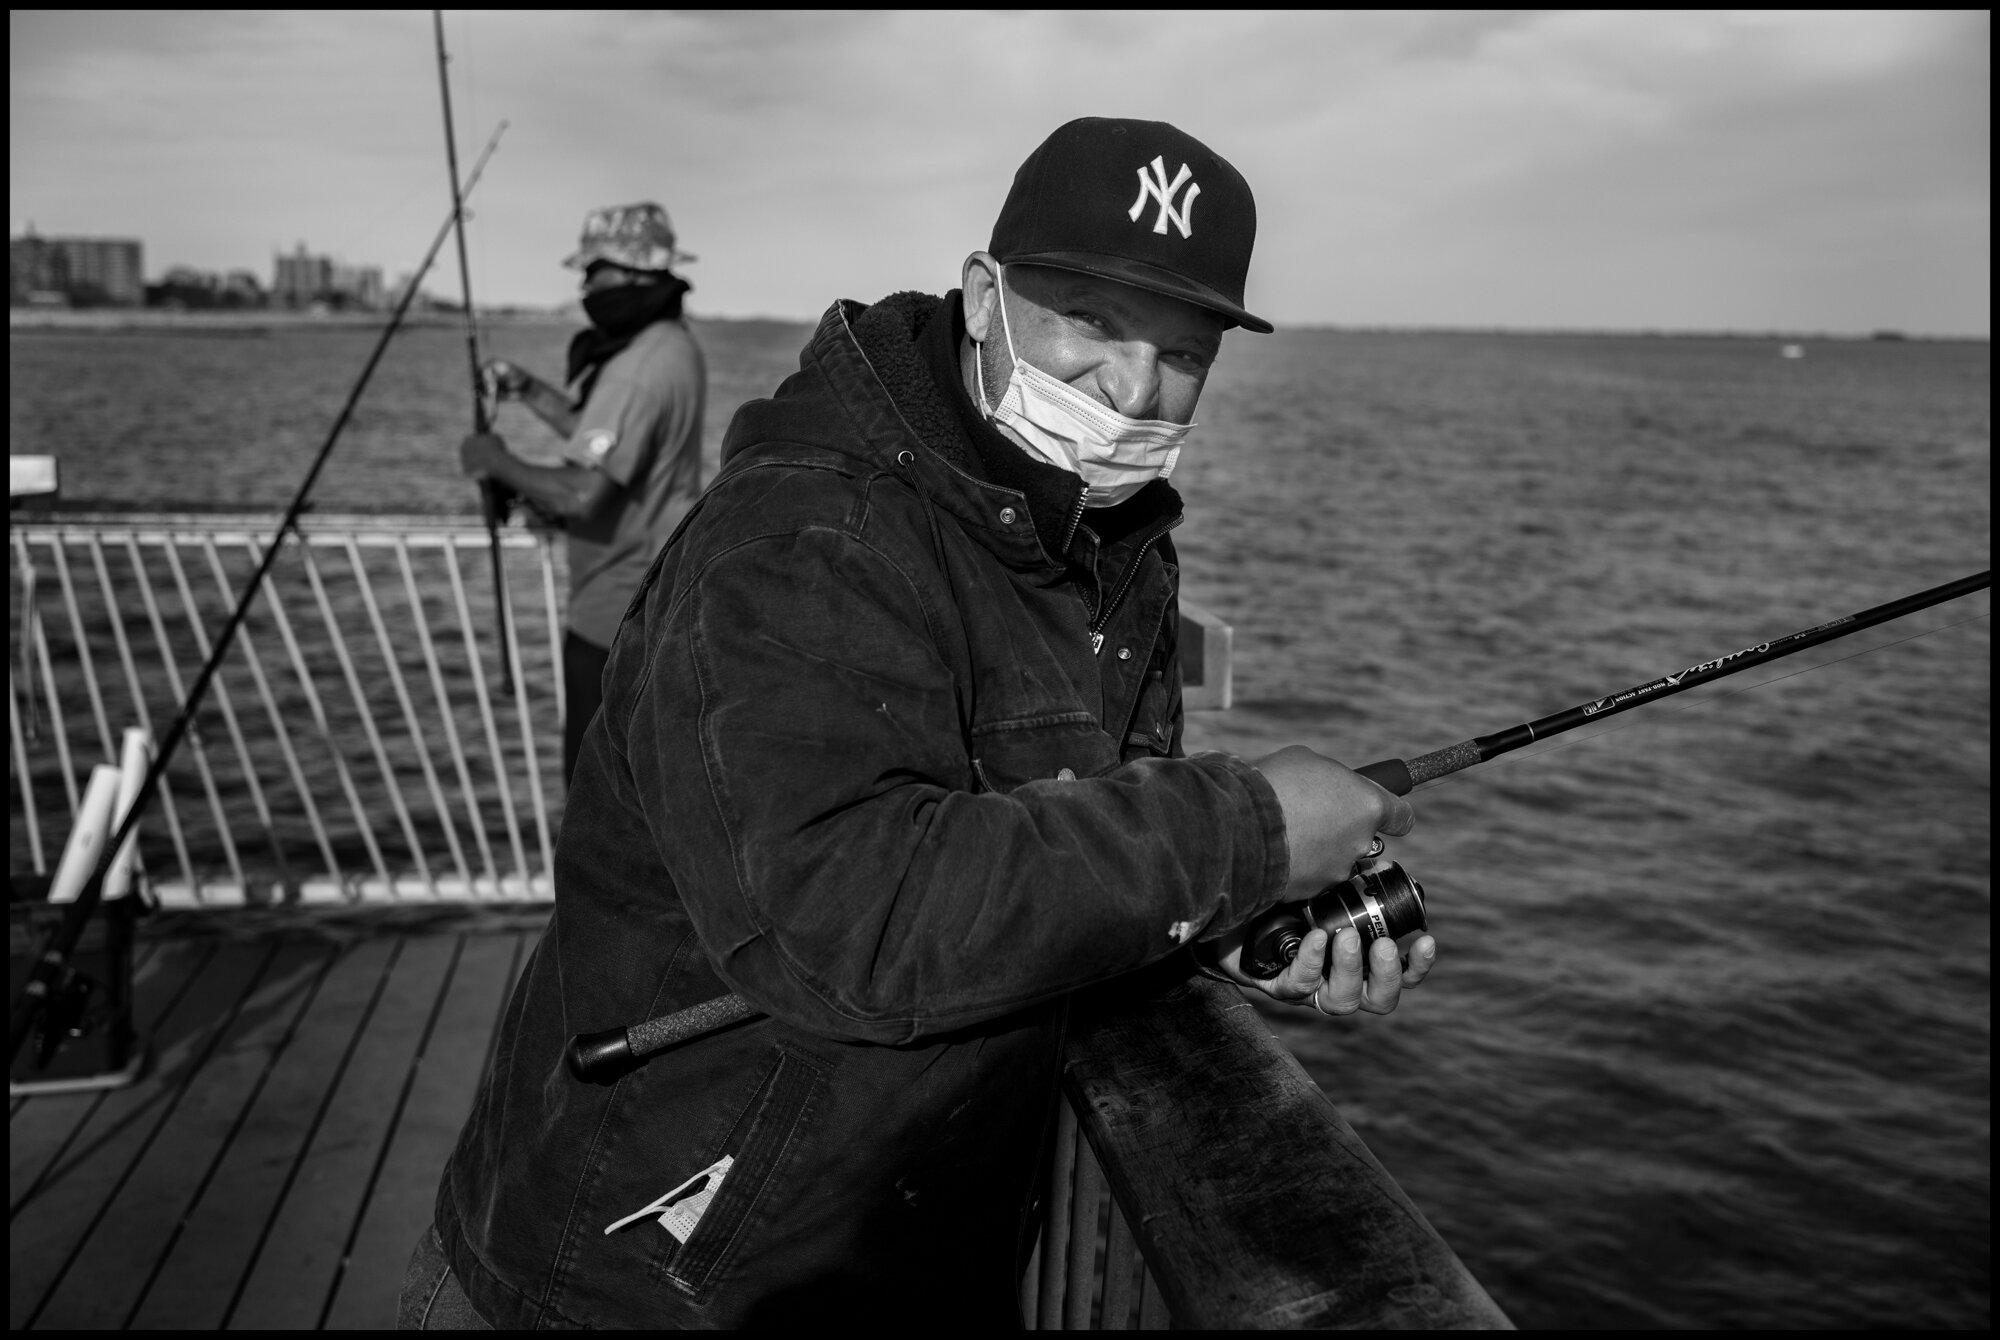  José, comes to fish at the pier in Coney Island almost every day. The pier has been closed several days during the lockdown. Coney Island, Brooklyn, New York.  May 16, 2020. © Peter Turnley.  ID# 49-012 